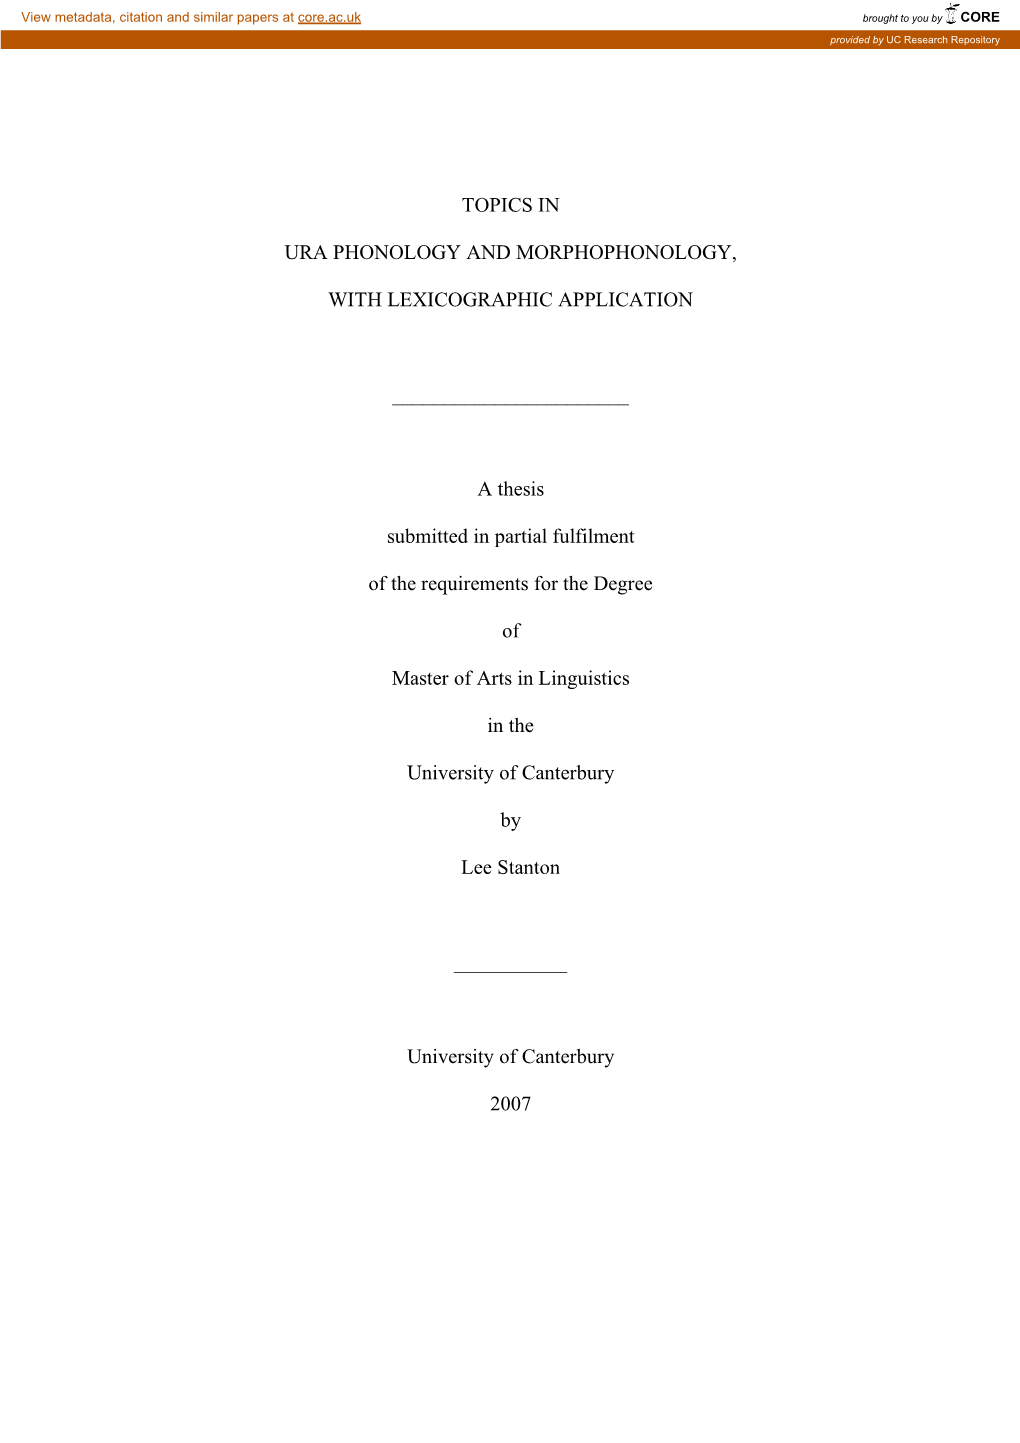 TOPICS in URA PHONOLOGY and MORPHOPHONOLOGY, with LEXICOGRAPHIC APPLICATION a Thesis Submitted in Partia